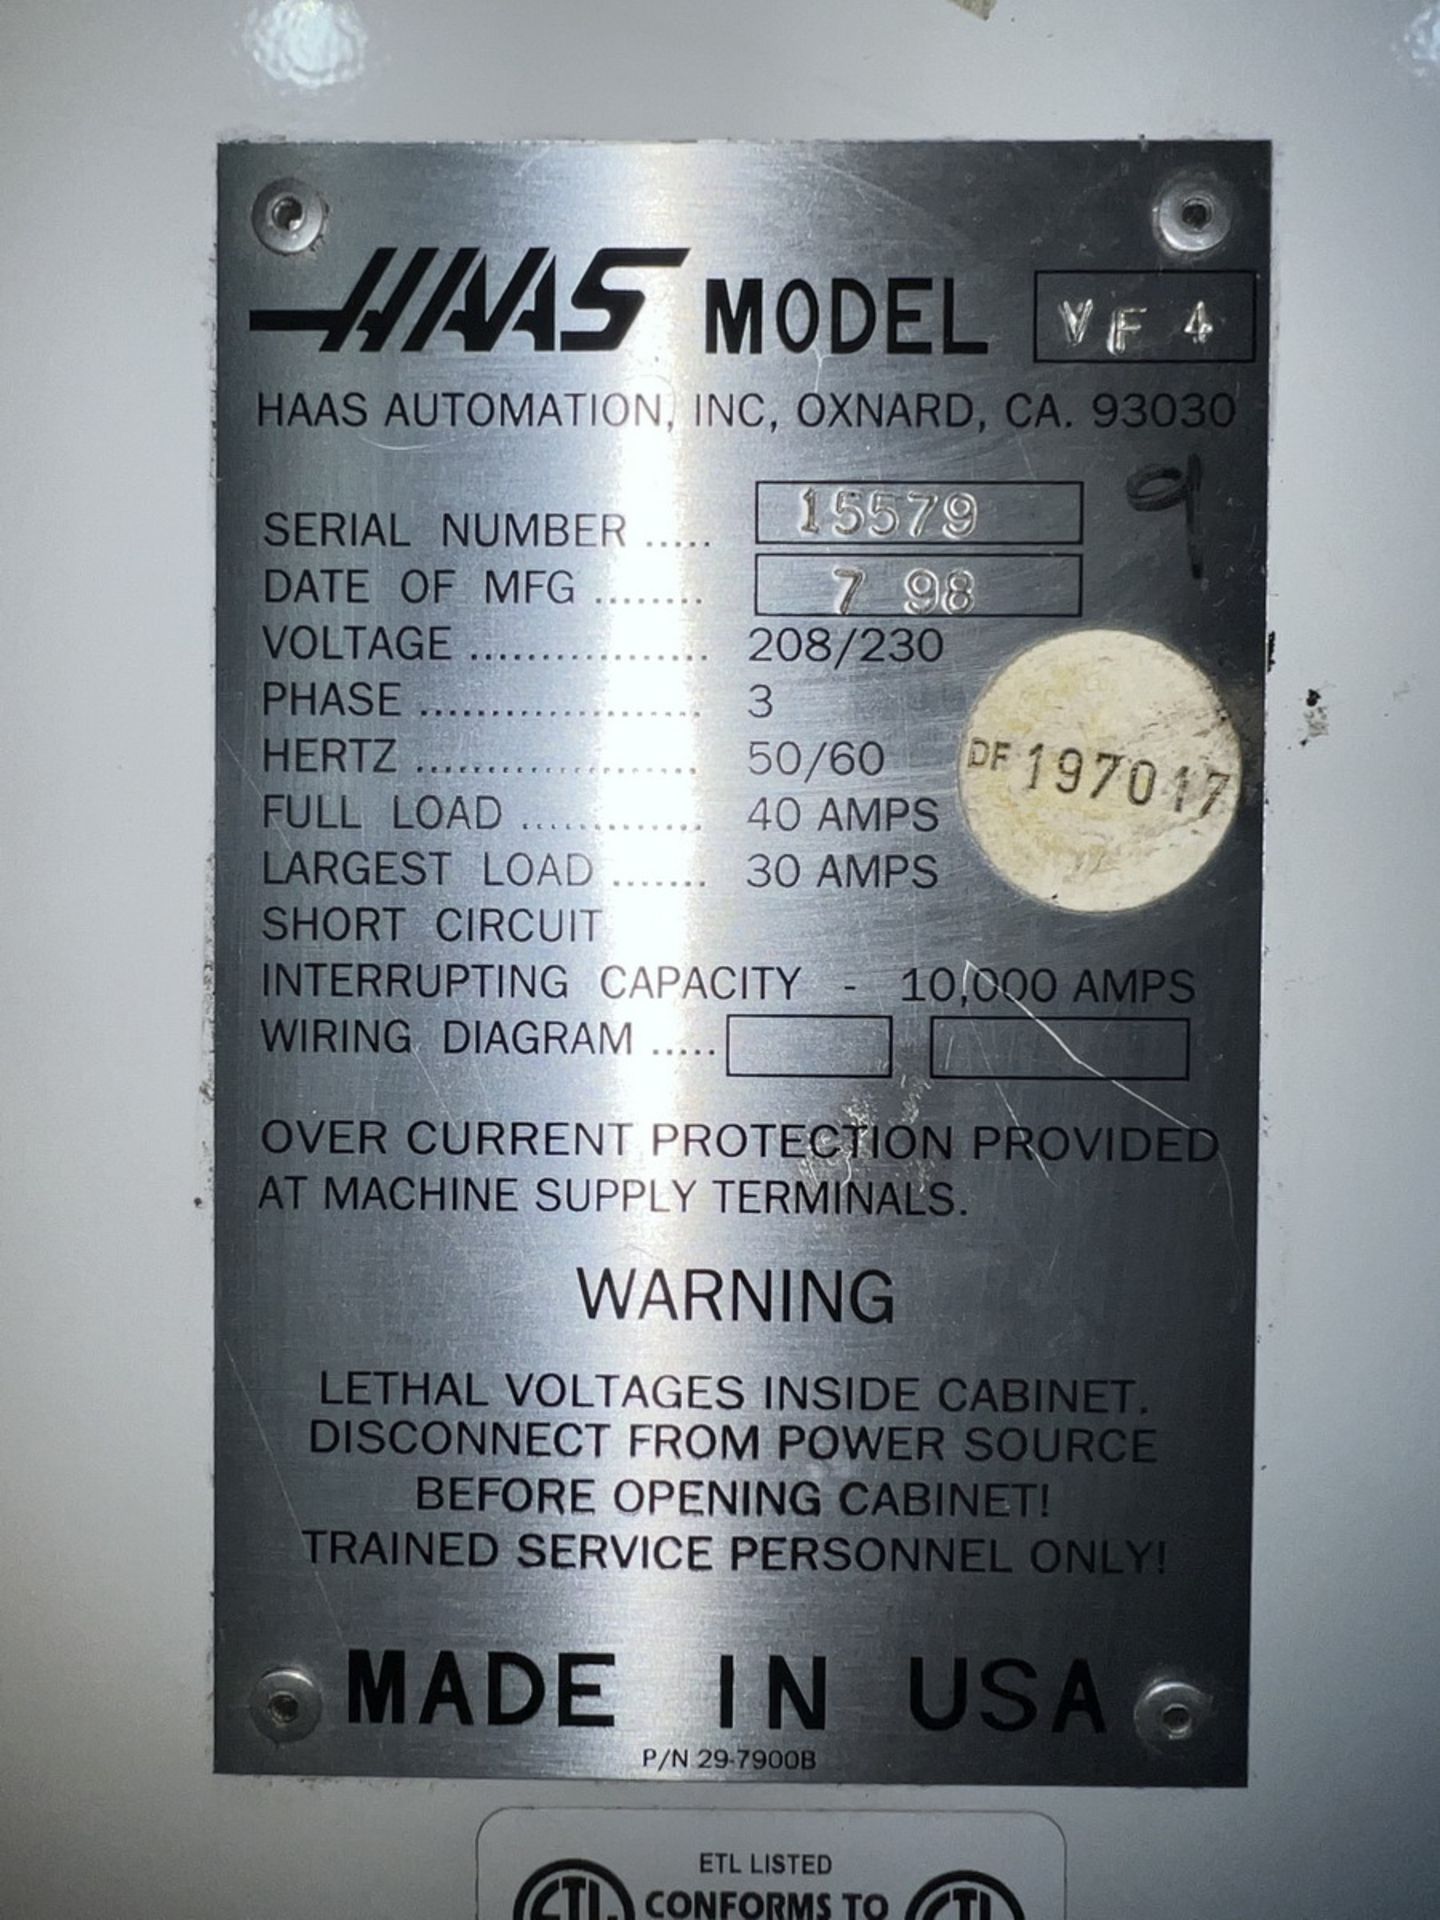 1998 Haas VF-4 3-Axis CNC Vertical Milling Machine - Image 12 of 12